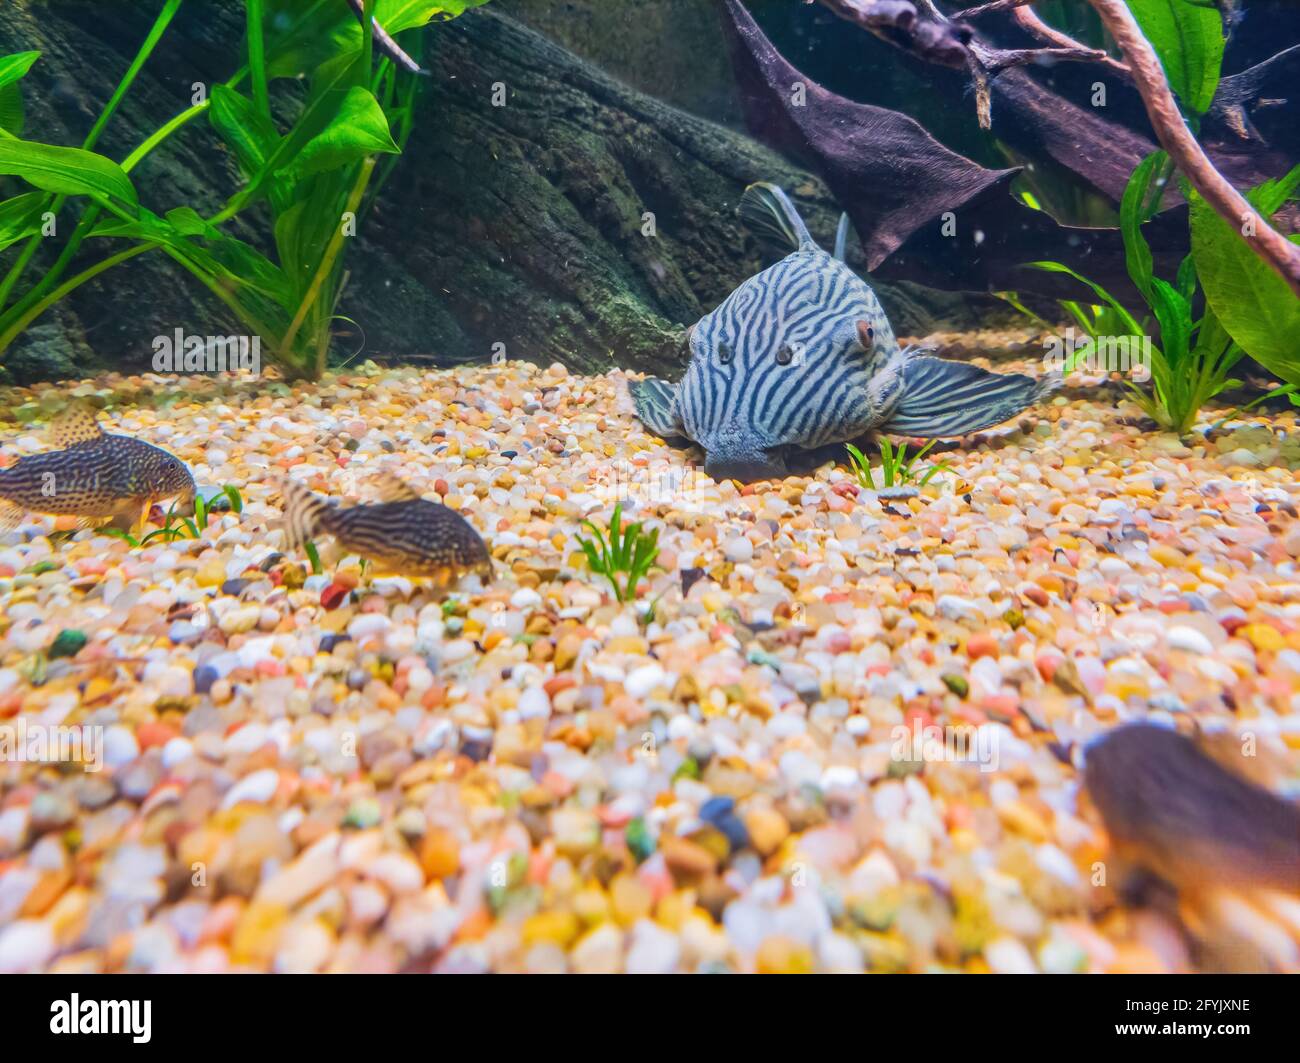 Close up shot of Panaque nigrolineatus cleaning the ground at San Francisco Stock Photo